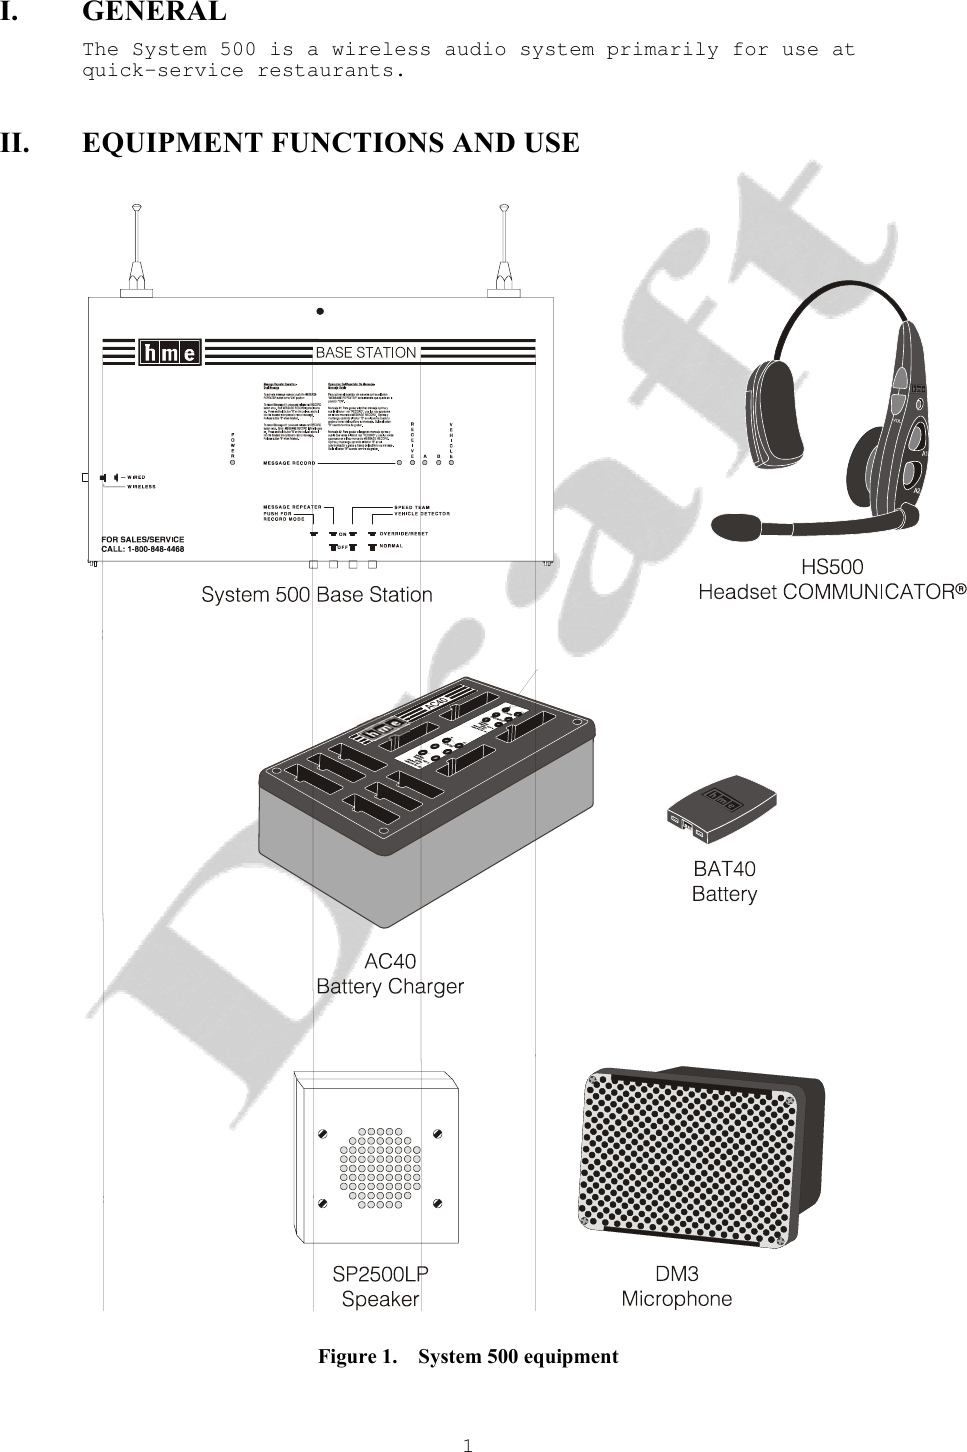   1I. GENERAL The System 500 is a wireless audio system primarily for use at quick-service restaurants. II. EQUIPMENT FUNCTIONS AND USE    Figure 1.    System 500 equipment 